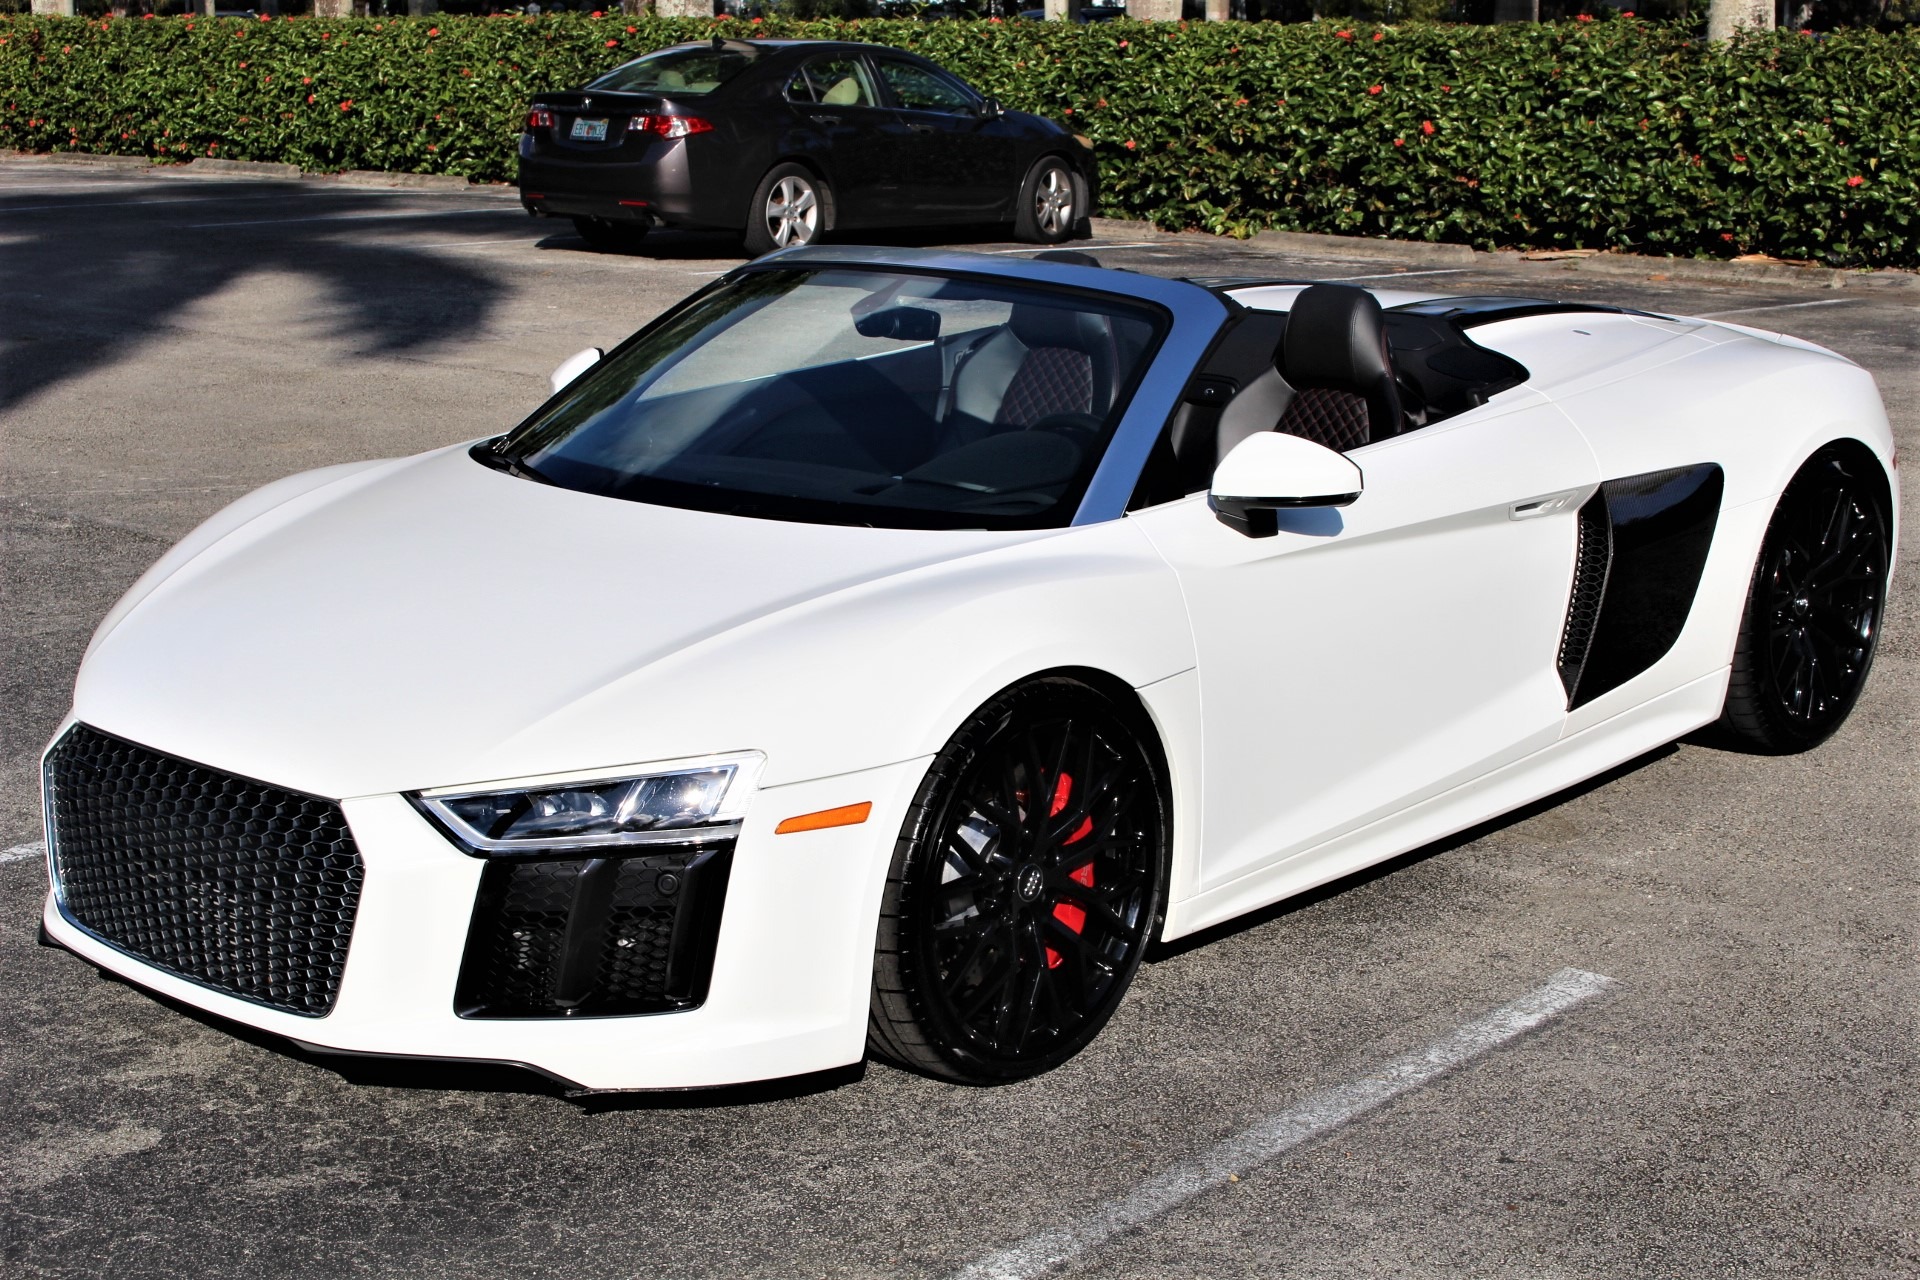 Used 2017 Audi R8 5.2 quattro V10 Spyder for sale Sold at The Gables Sports Cars in Miami FL 33146 1